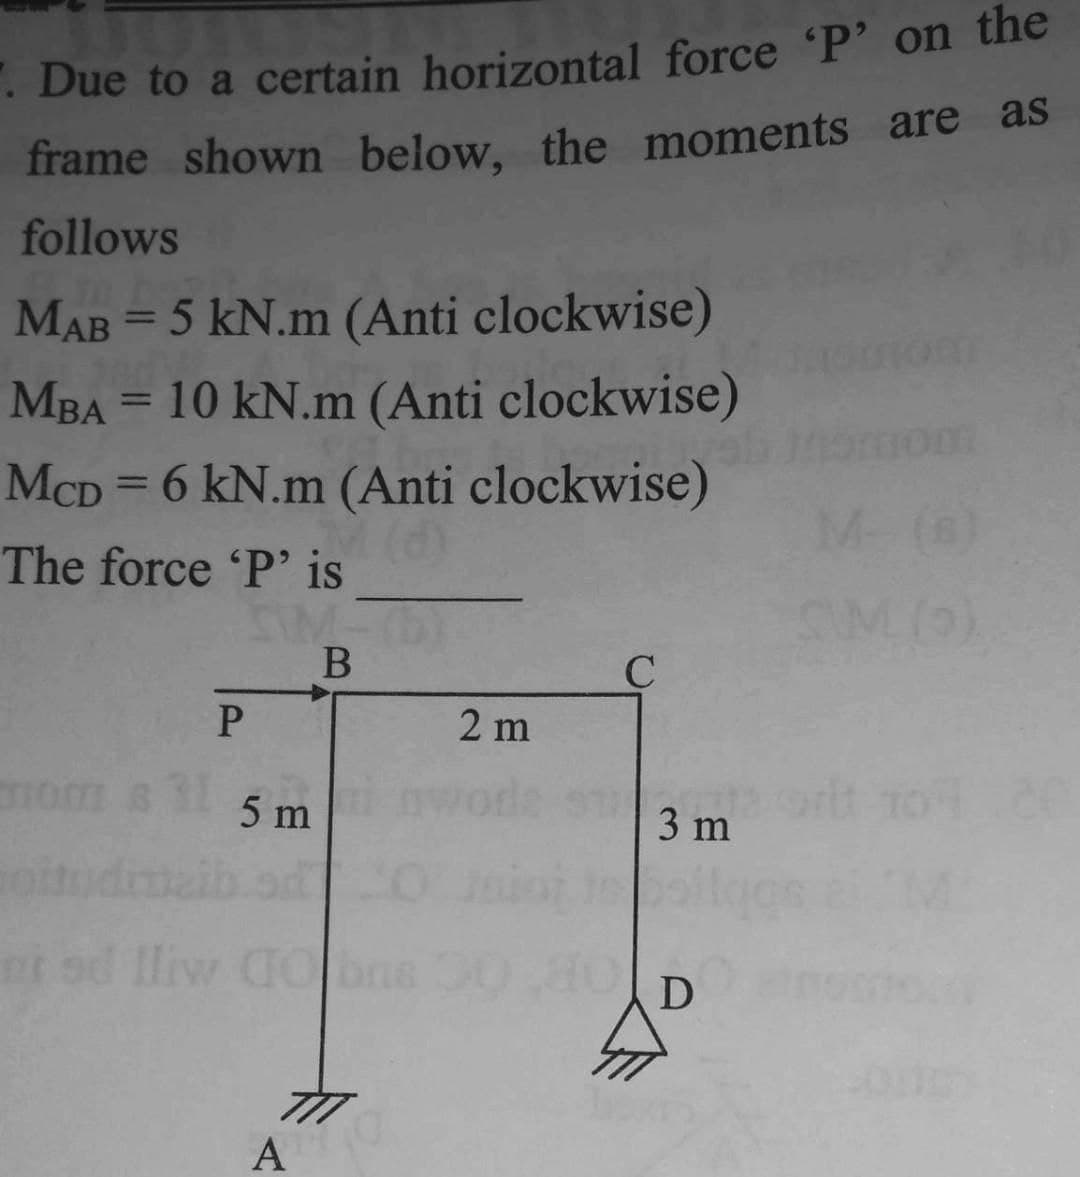 . Due to a certain horizontal force 'P' on the
frame shown below, the moments are as
follows
MAB=5 kN.m (Anti clockwise)
MBA = 10 kN.m (Anti clockwise)
McD = 6 kN.m (Anti clockwise)
The force 'P' is
B
om 8
P
5 m
A
2 m
C
3 m
D